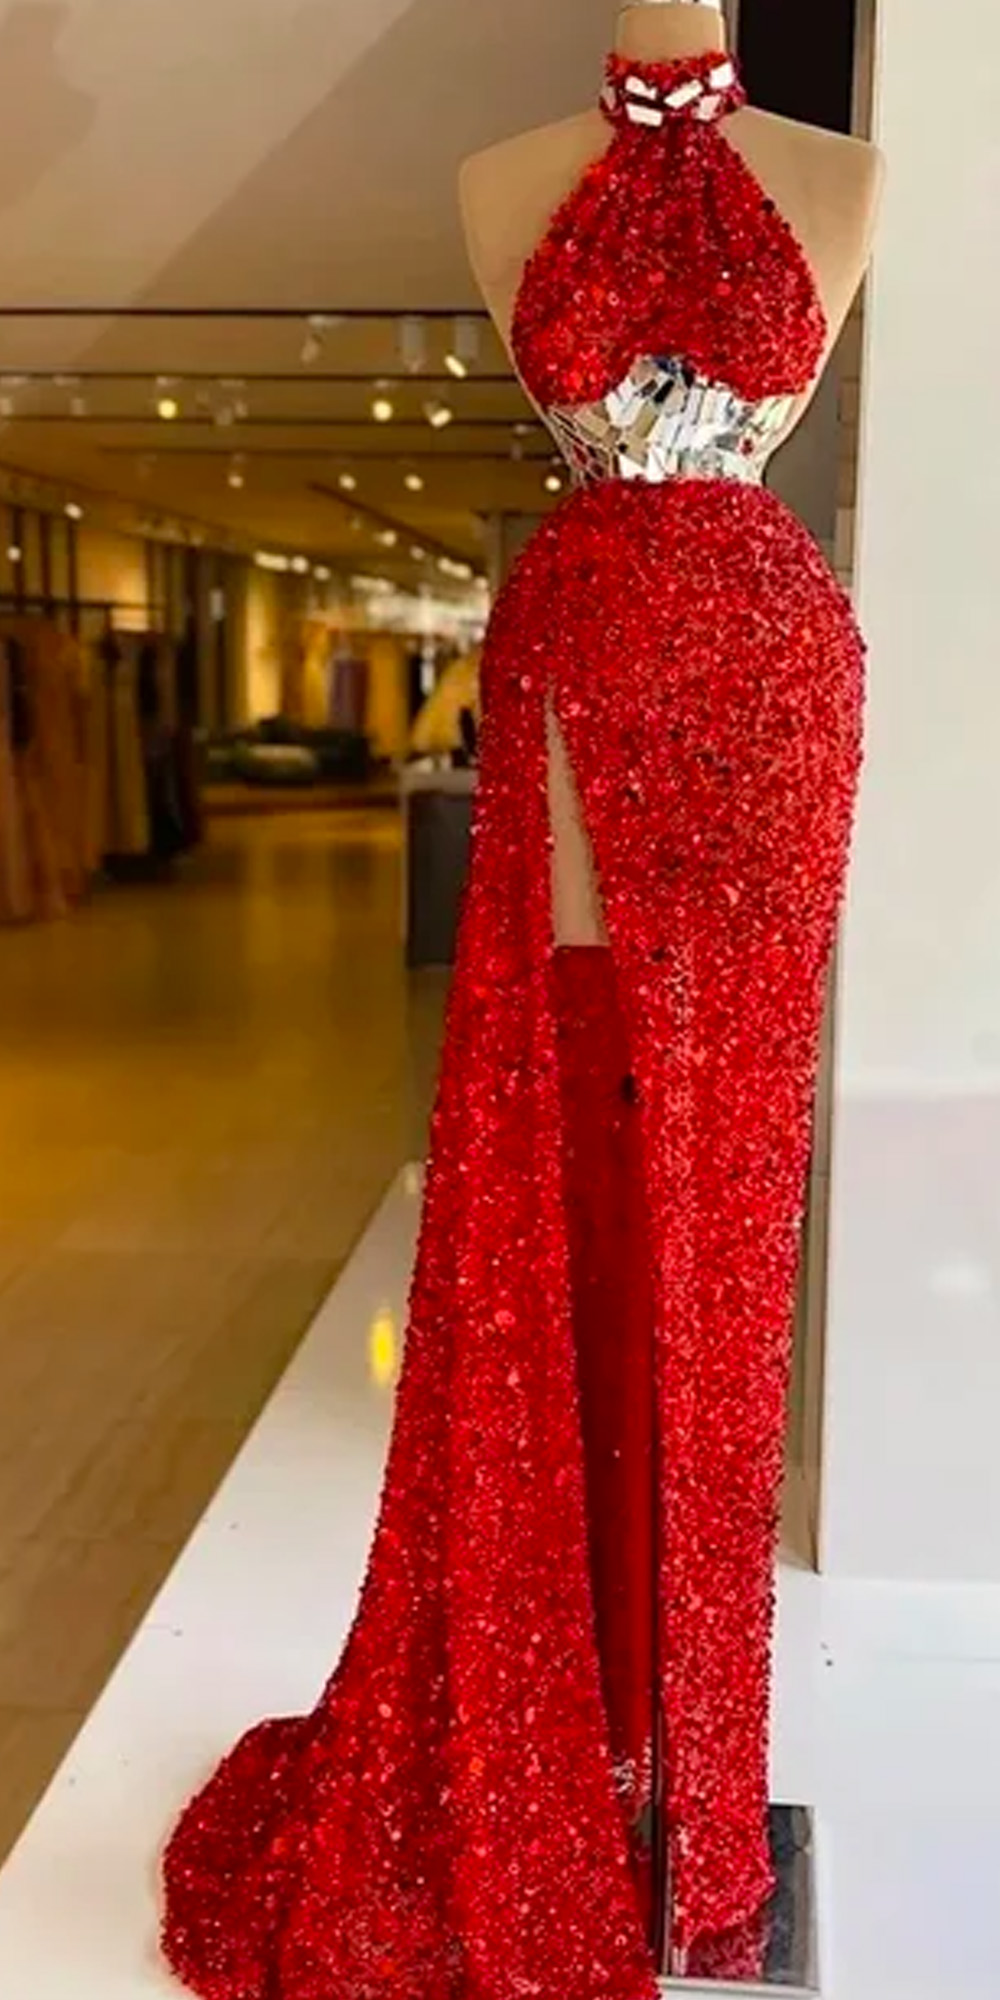 Luxury Burgundy Mermaid Evening Dresses Crystals Sequins Beads Prom Dress Sleeveless High Slit Formal Party Gowns Robe De Mariée